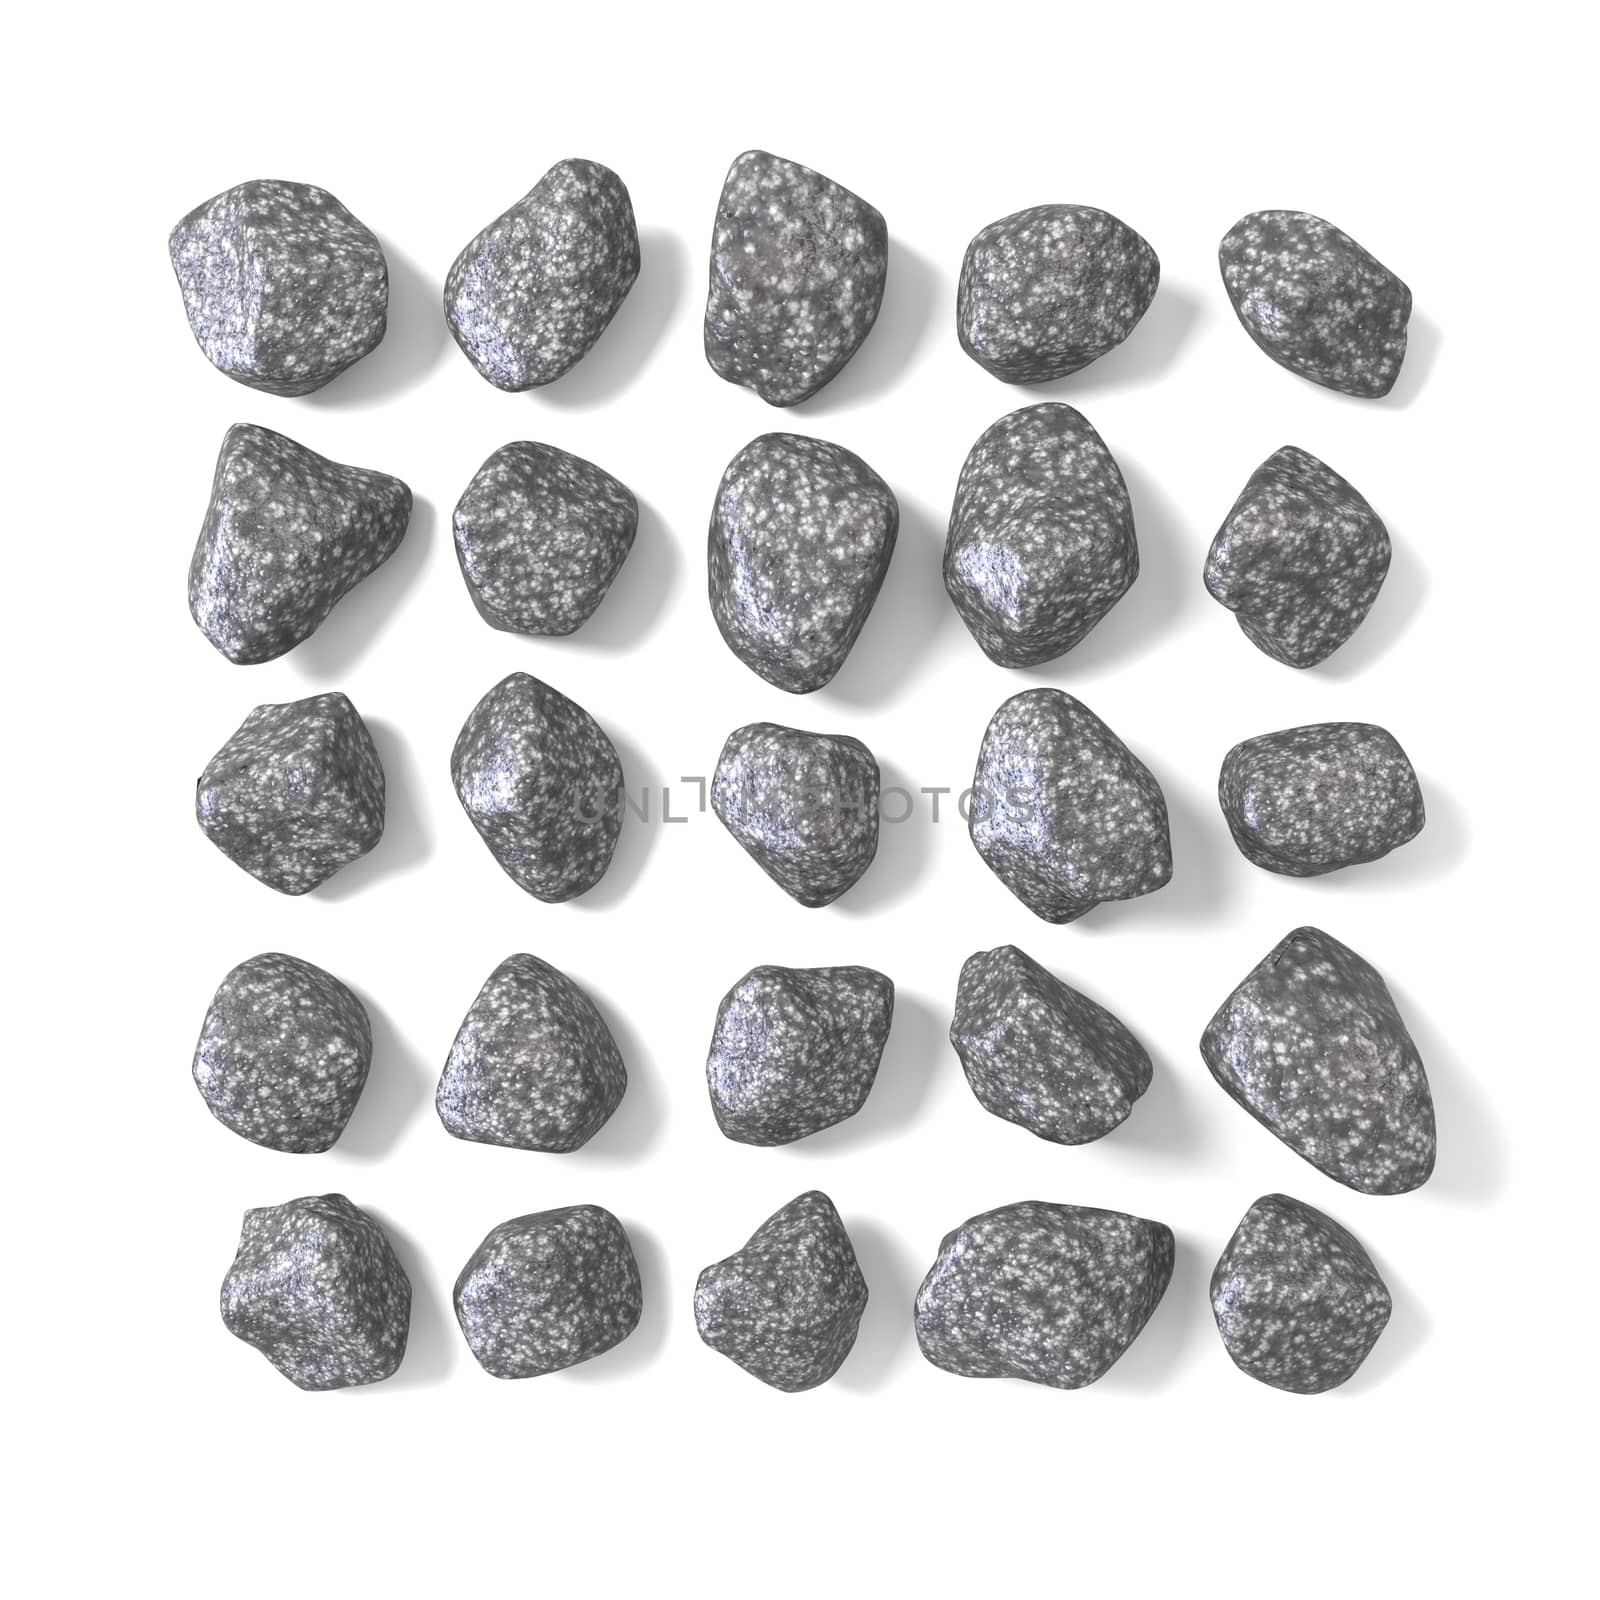 Abstract array made of rocks 3D render illustration isolated on white background